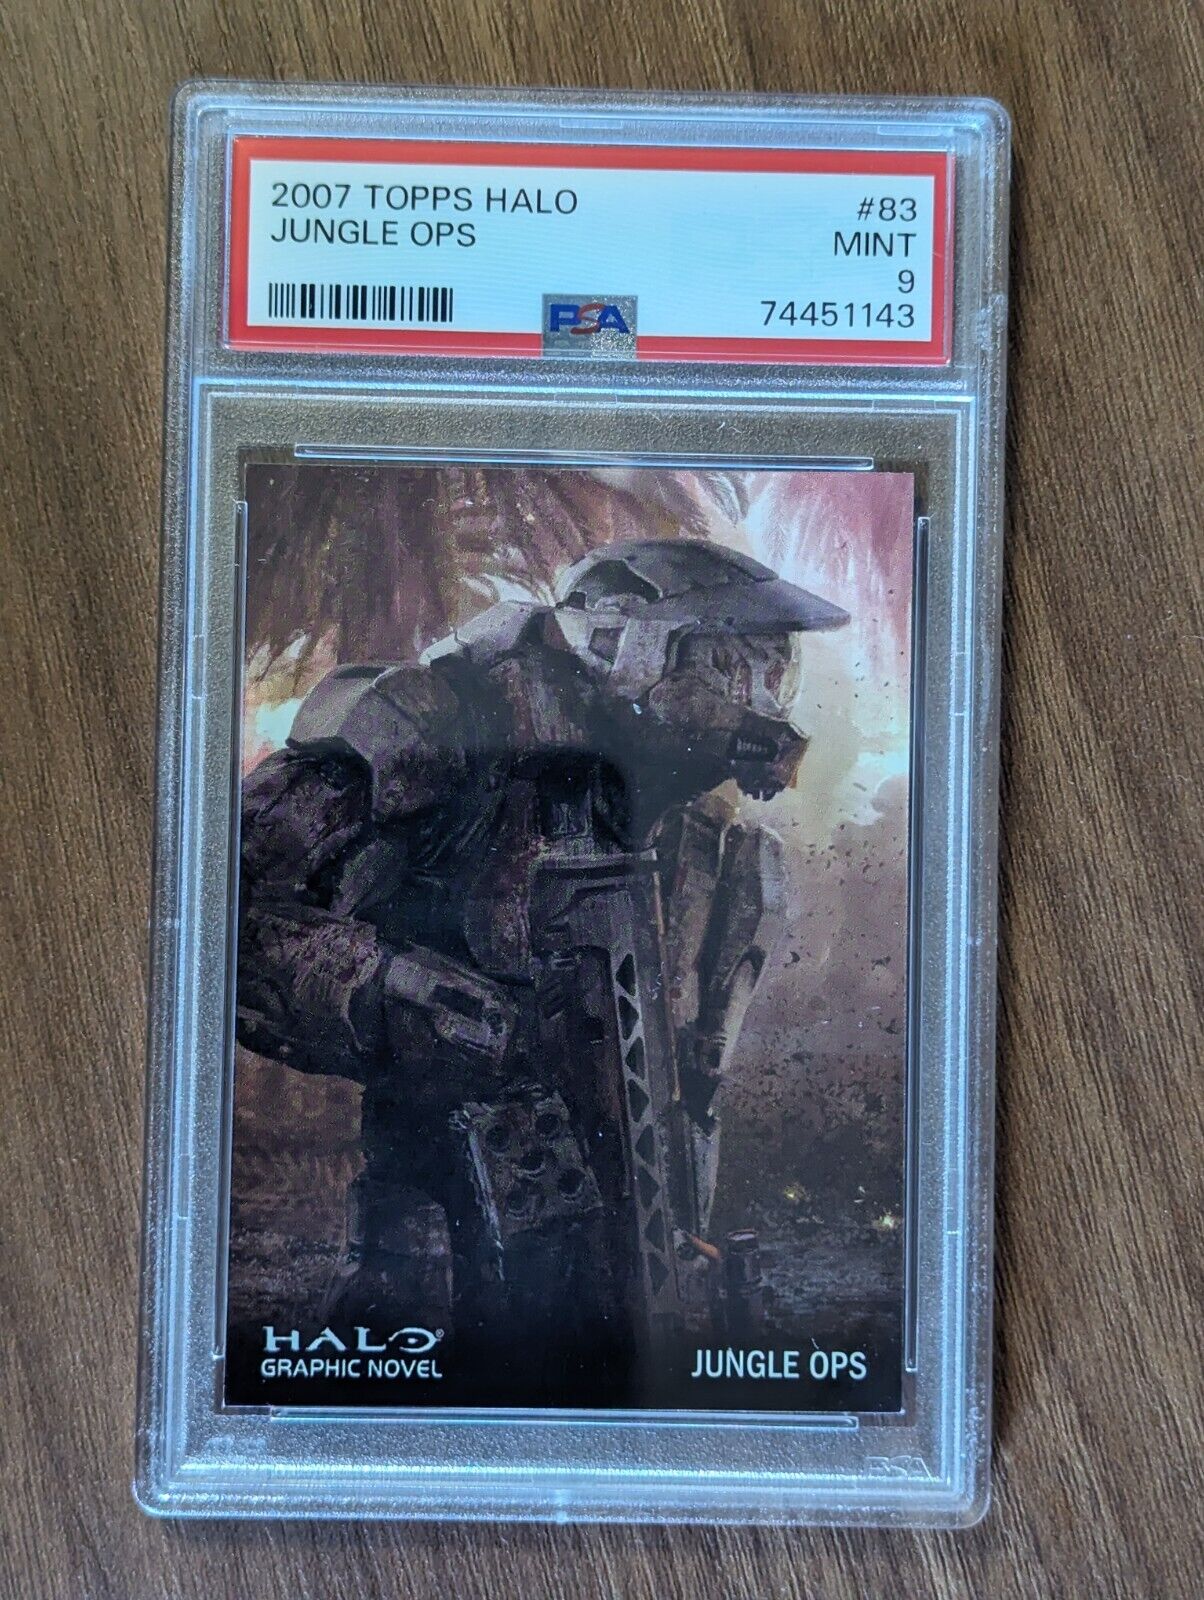 Jungle Ops - Graded PSA Mint 9 - #83 - 2007 Topps Halo - 2007 Halo Card